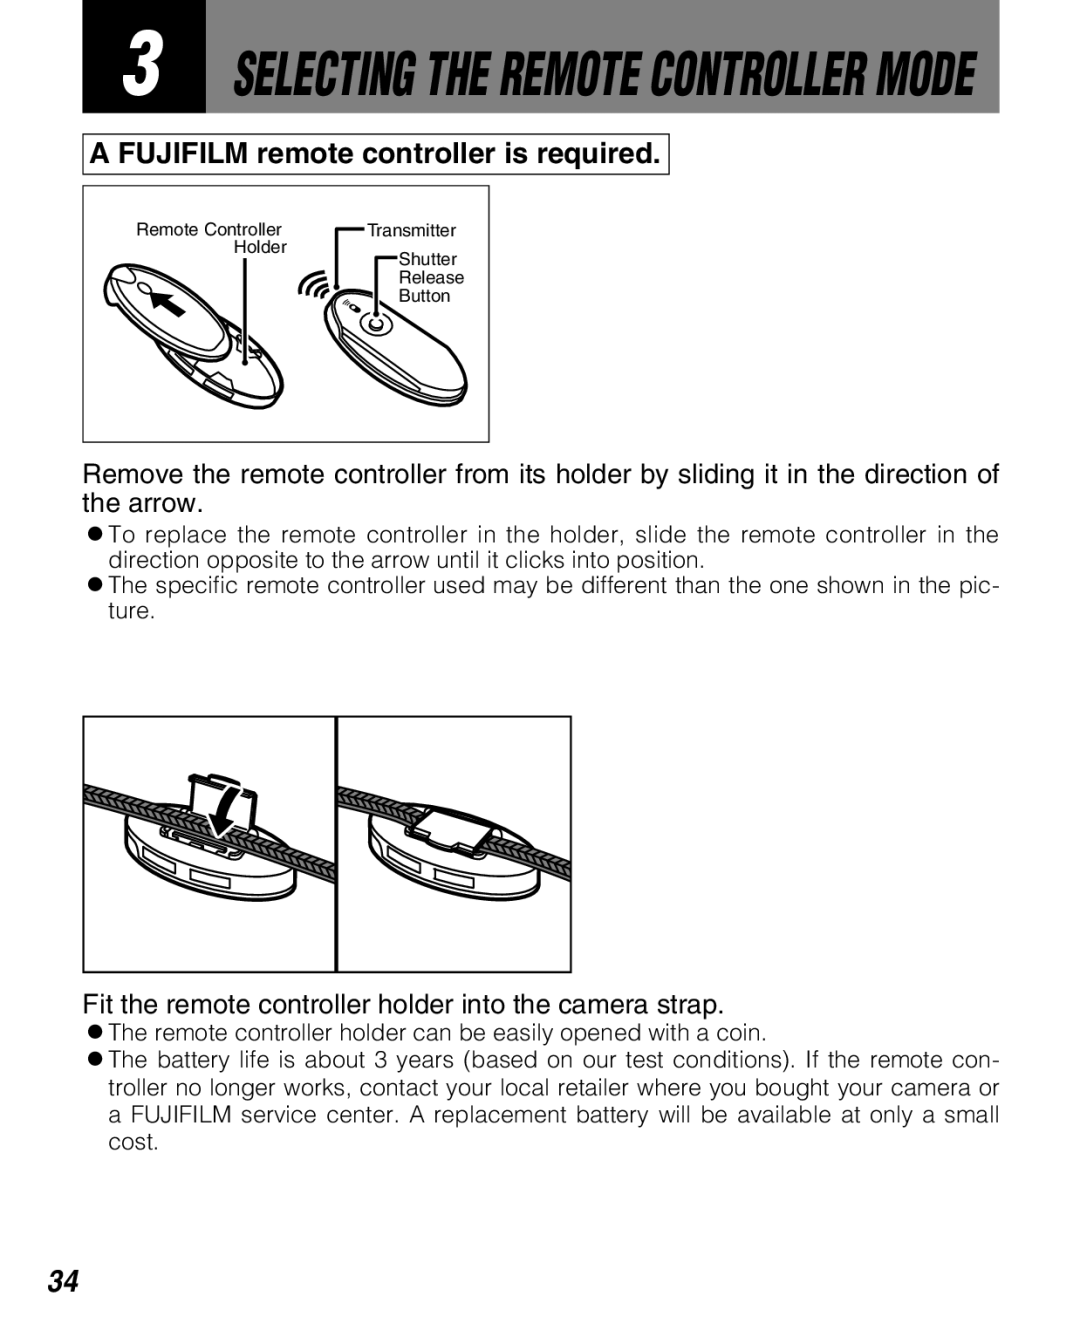 FujiFilm Zoom Date 160ez owner manual A FUJIFILM remote controller is required, Selecting The Remote Controller Mode 